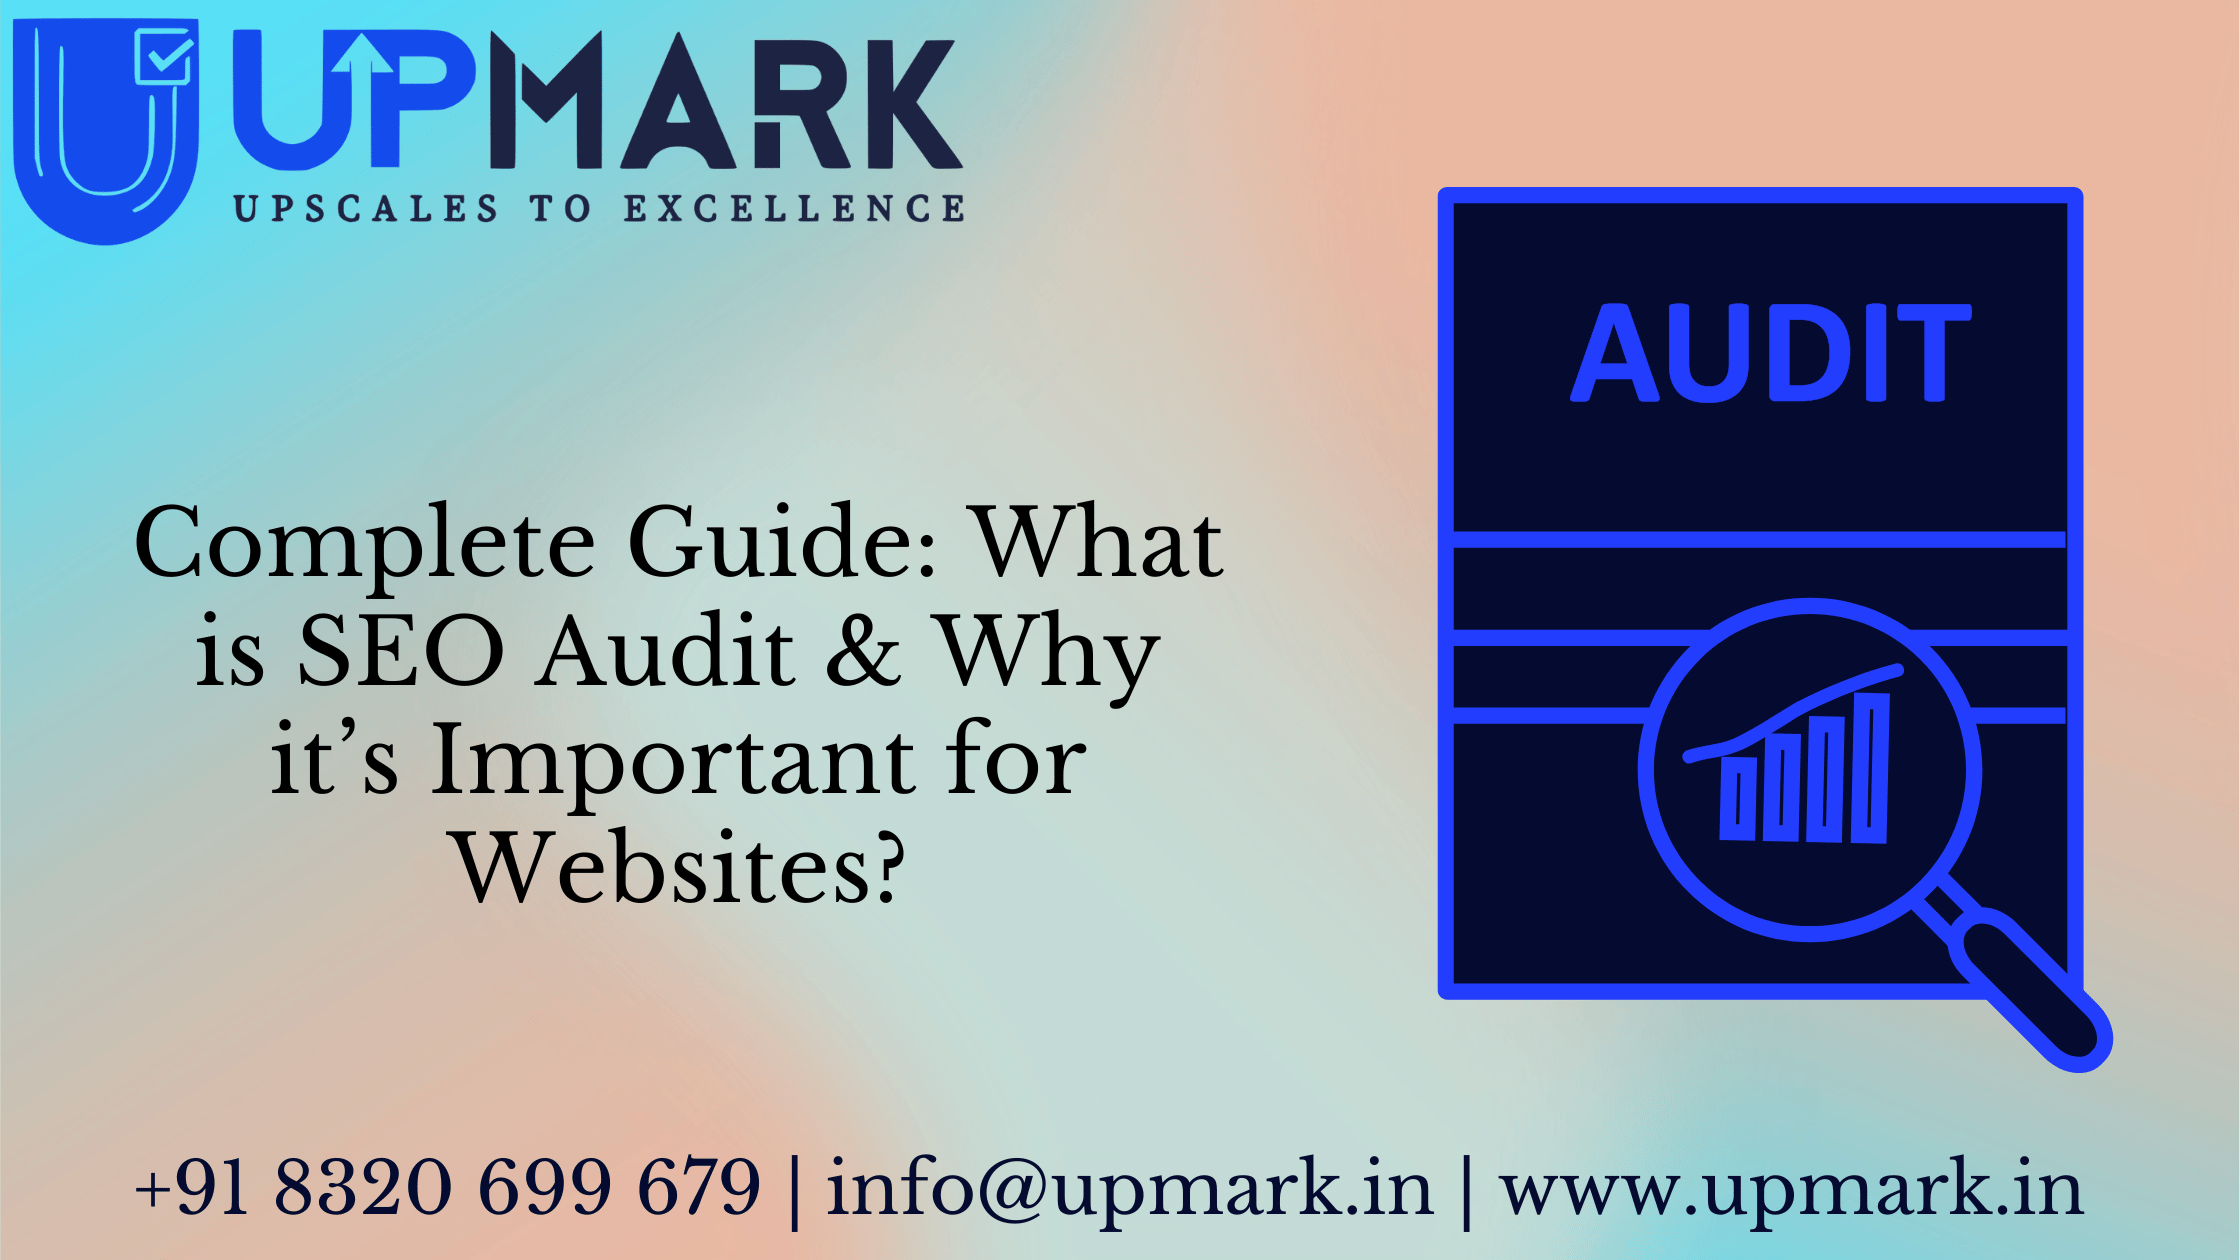 Complete Guide: What is SEO Audit & Why it’s Important for Websites?